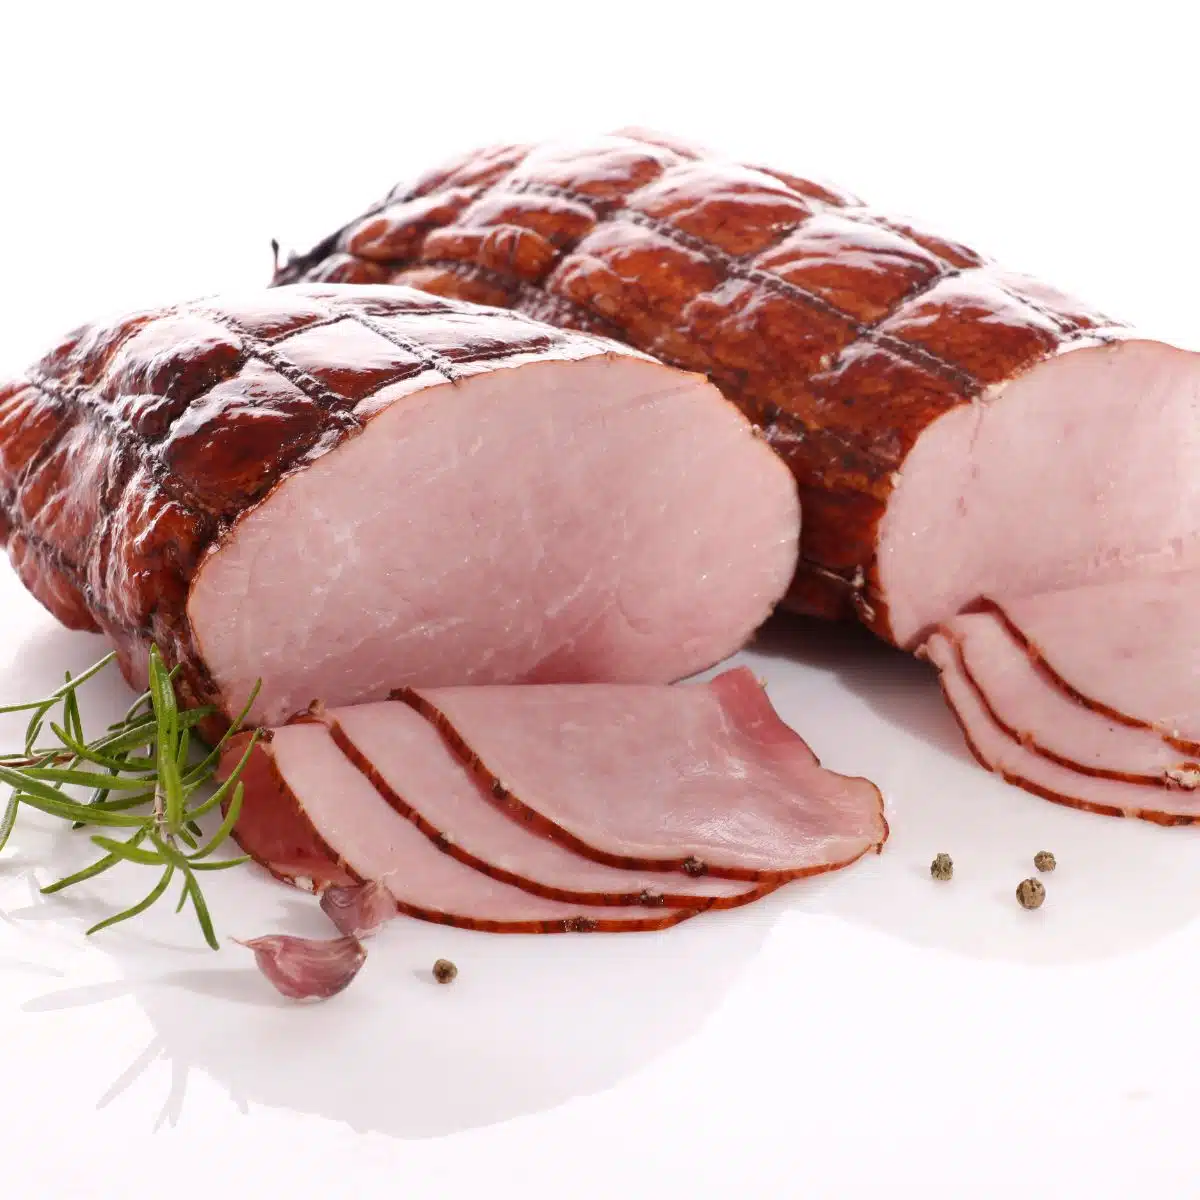 Square image of a couple of hams on a white background.